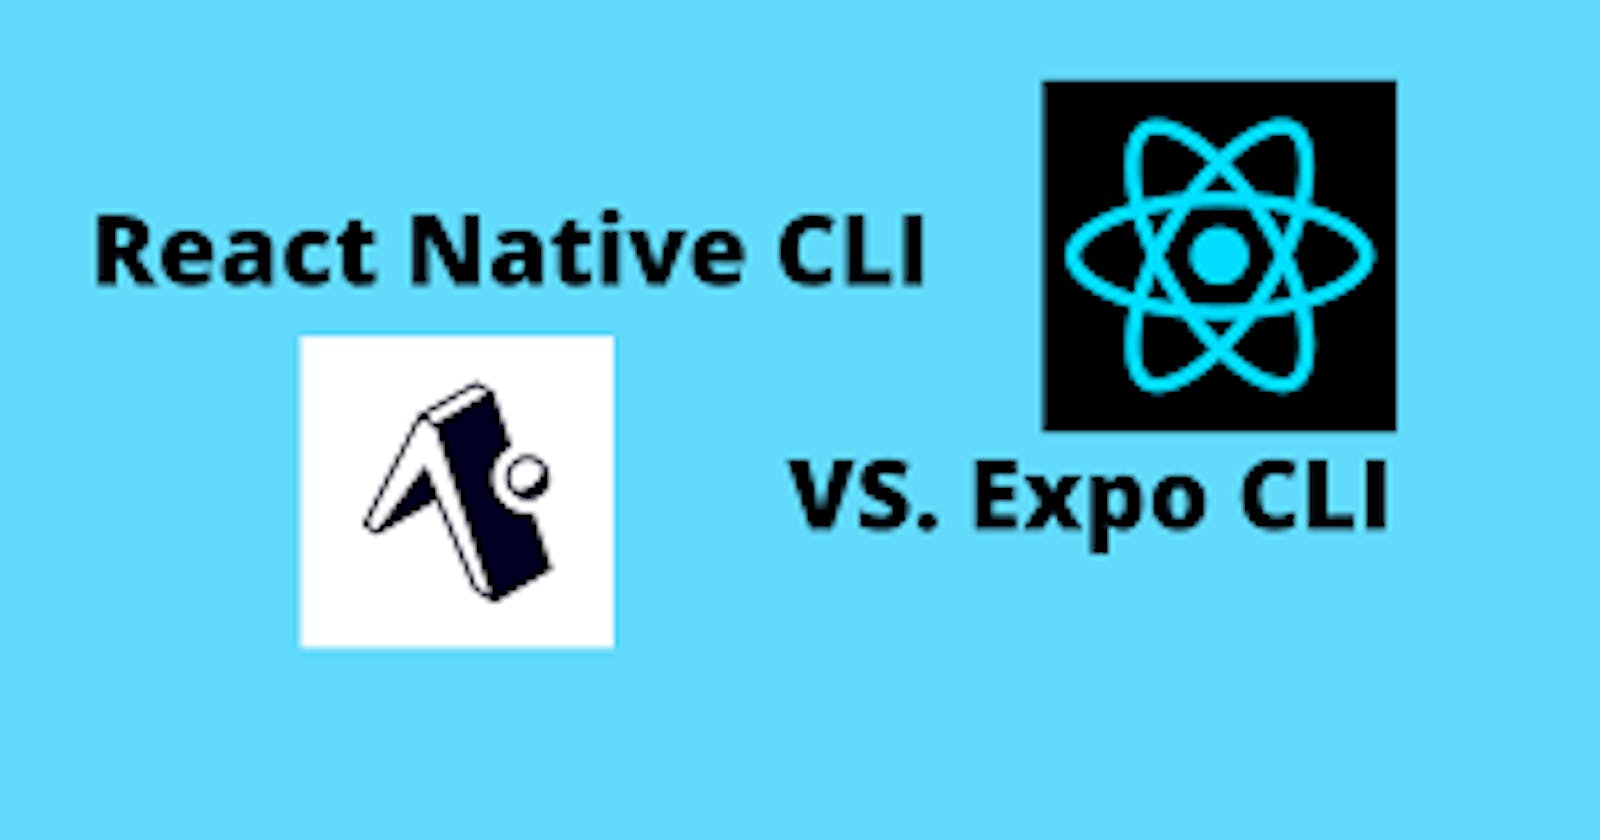 Learn React Native for beginner diffcult to choose React Native CLI or React Native Expo.